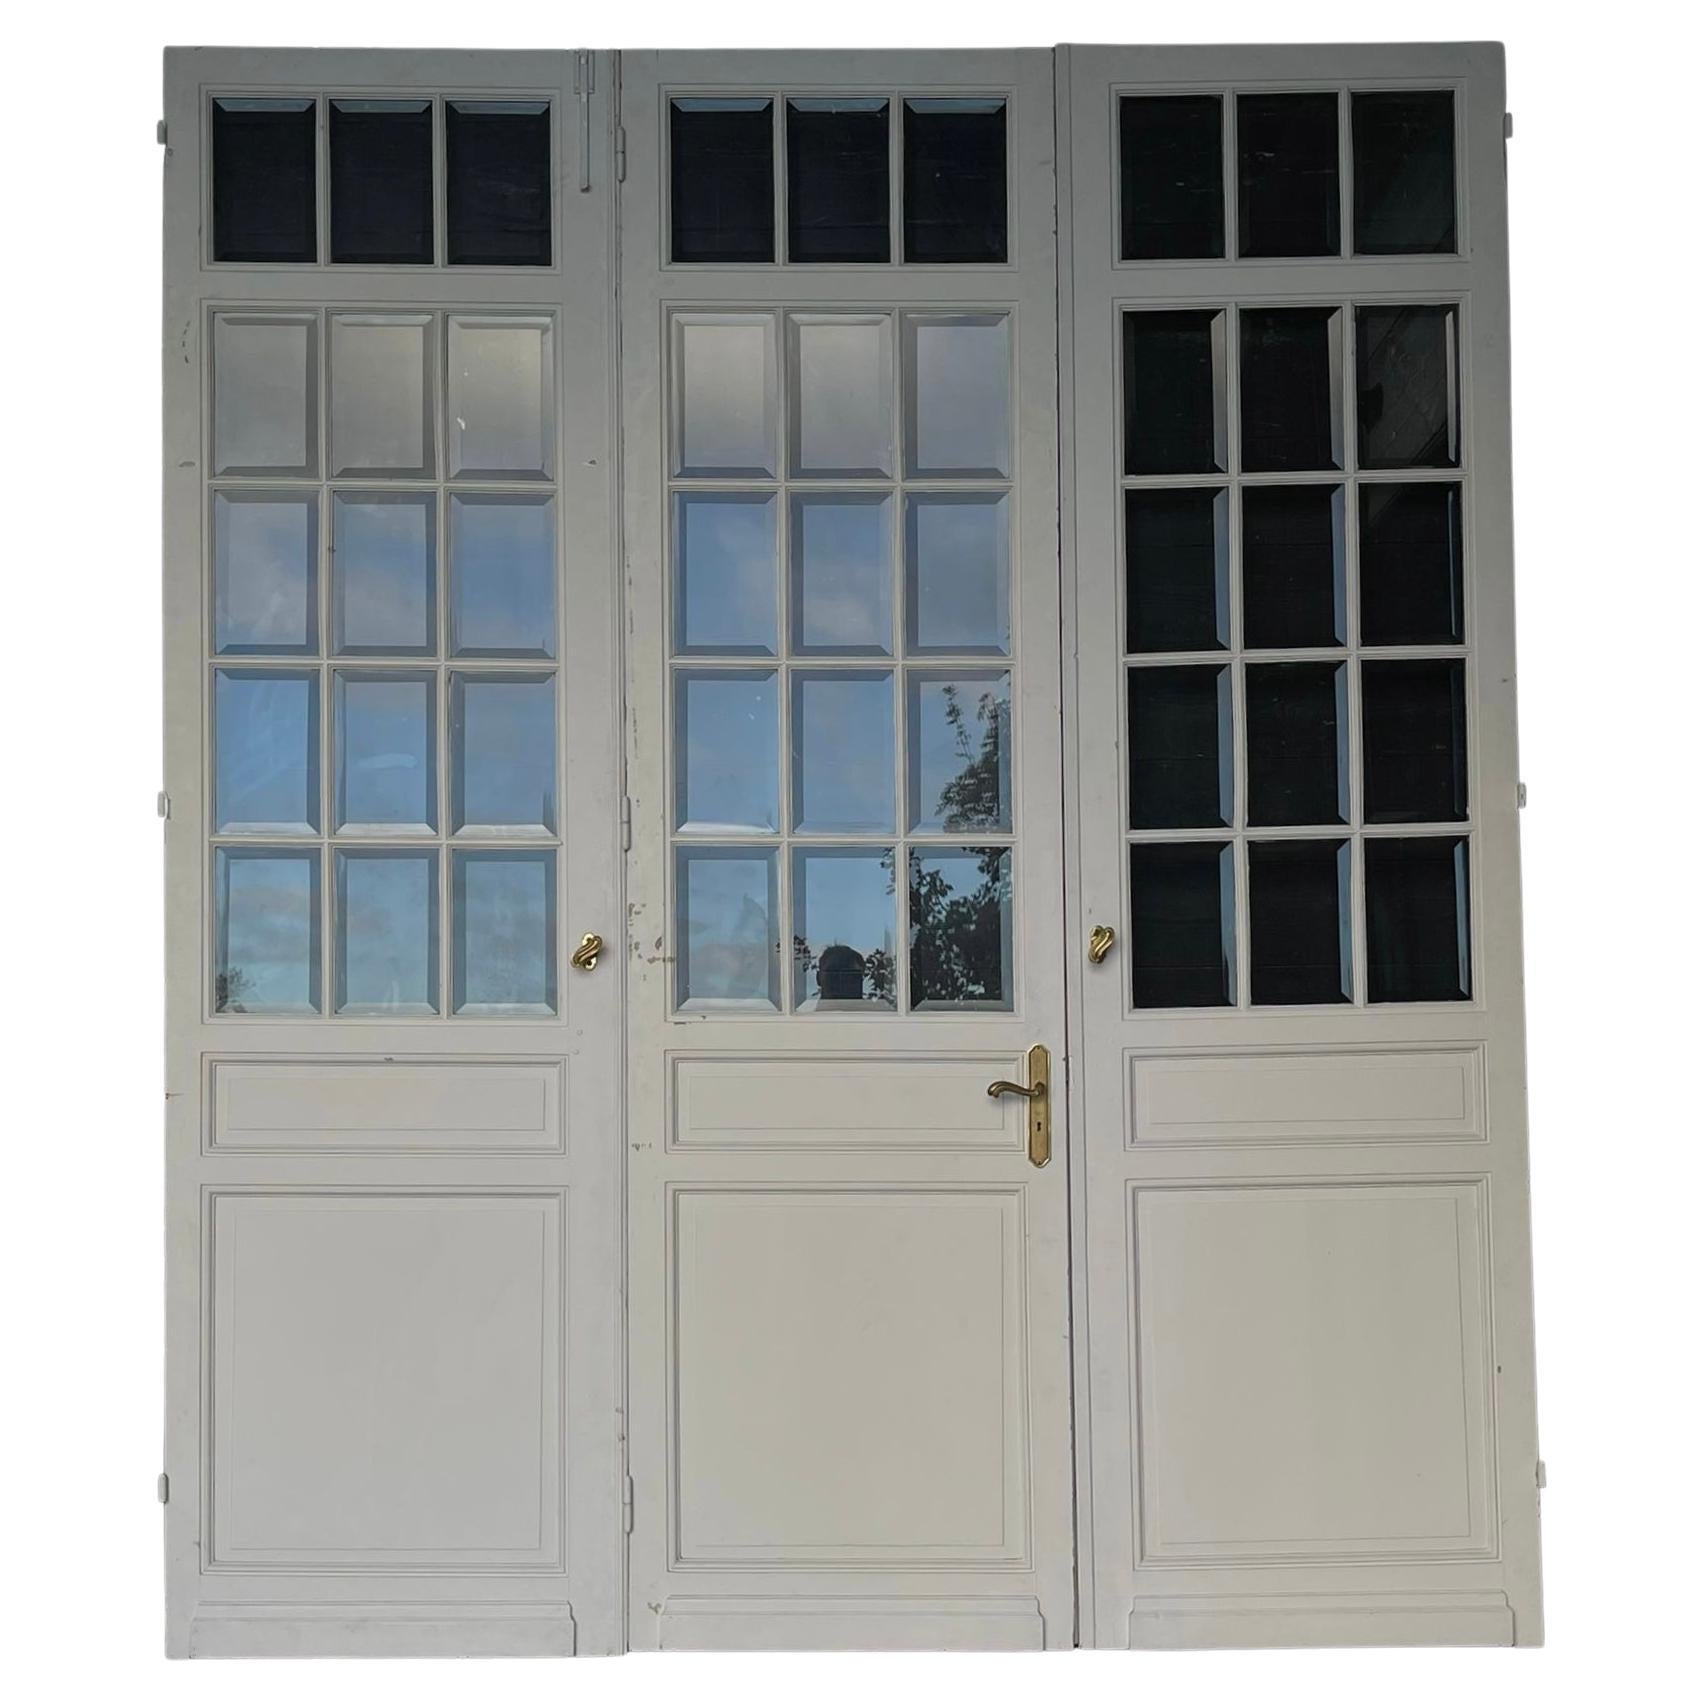 Set 3 French Chateau Doors For Sale